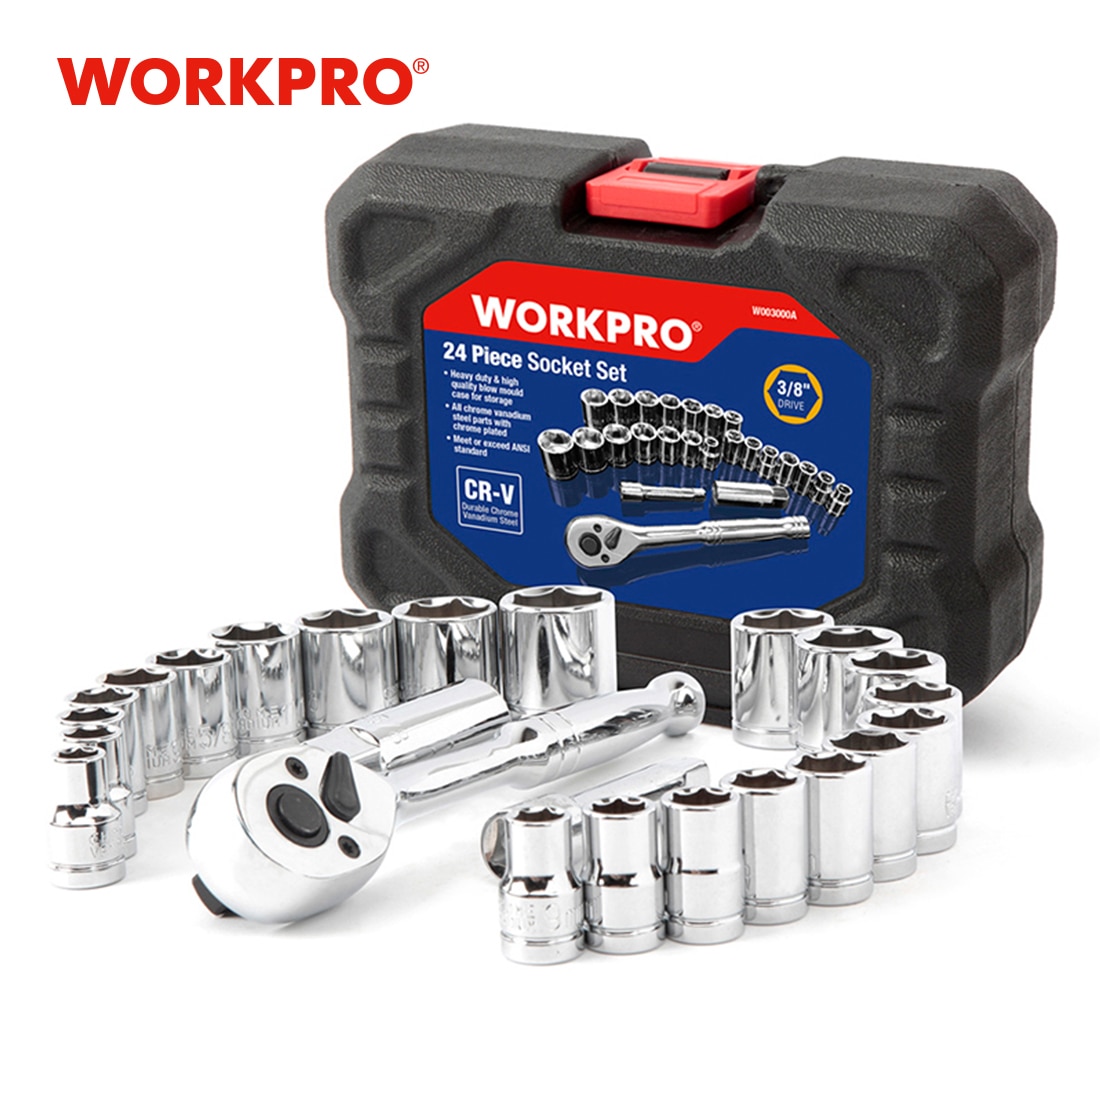 WORKPRO 24PC Tool Set Torque Wrench Socket Set 3/8" Ratchet Wrench Socket Spanner 14-64pc